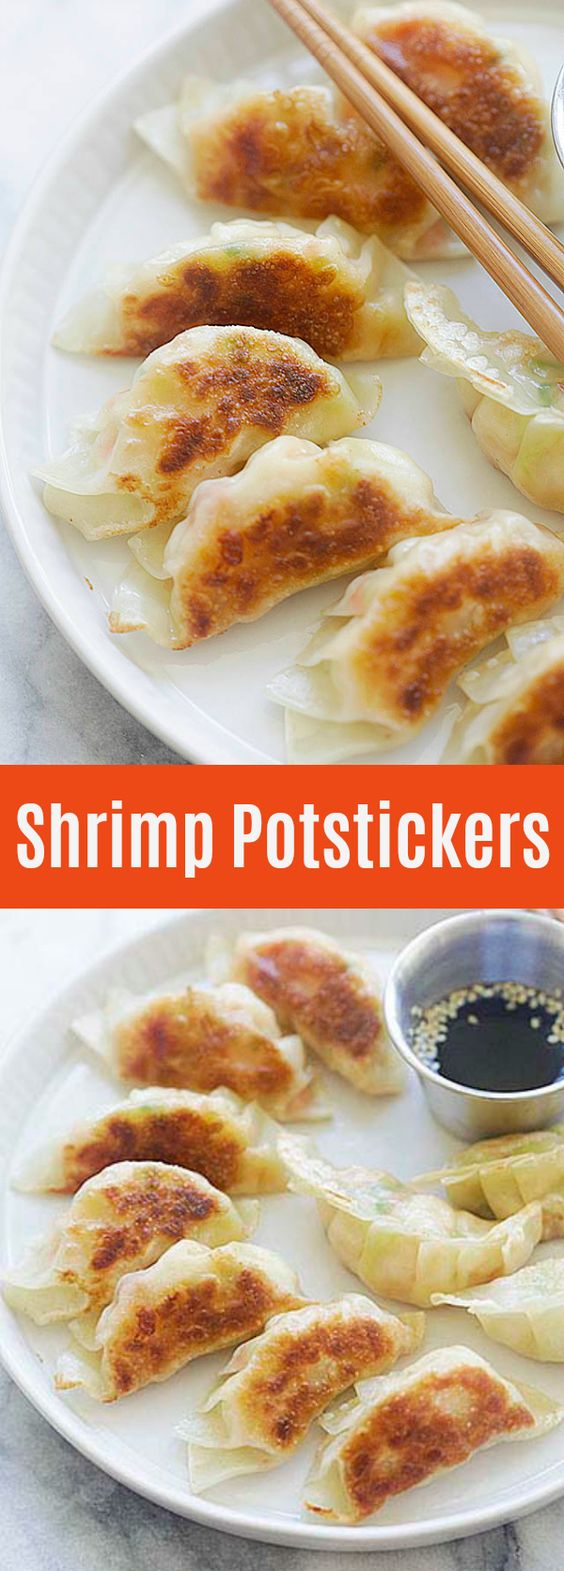 Shrimp Potstickers - delicious potstickers filled with juicy shrimp. This potstickers recipe is so easy with step-by-step picture guide. Learn how to make homemade potstickers today!